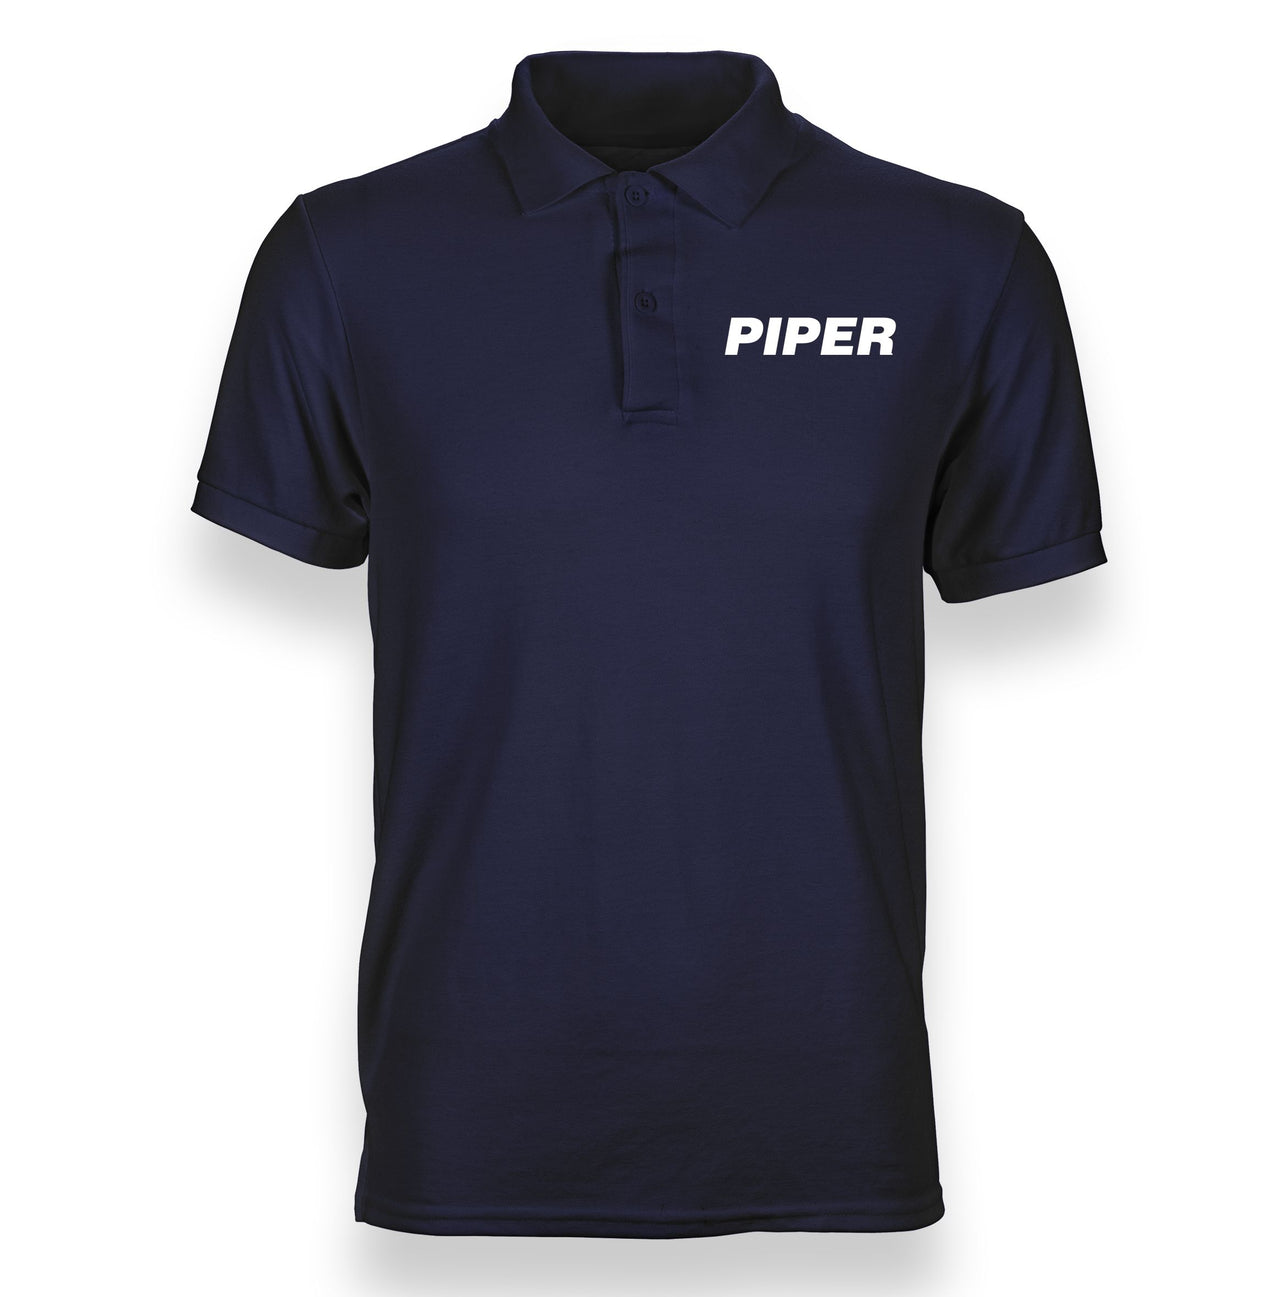 Piper & Text Designed Polo T-Shirts